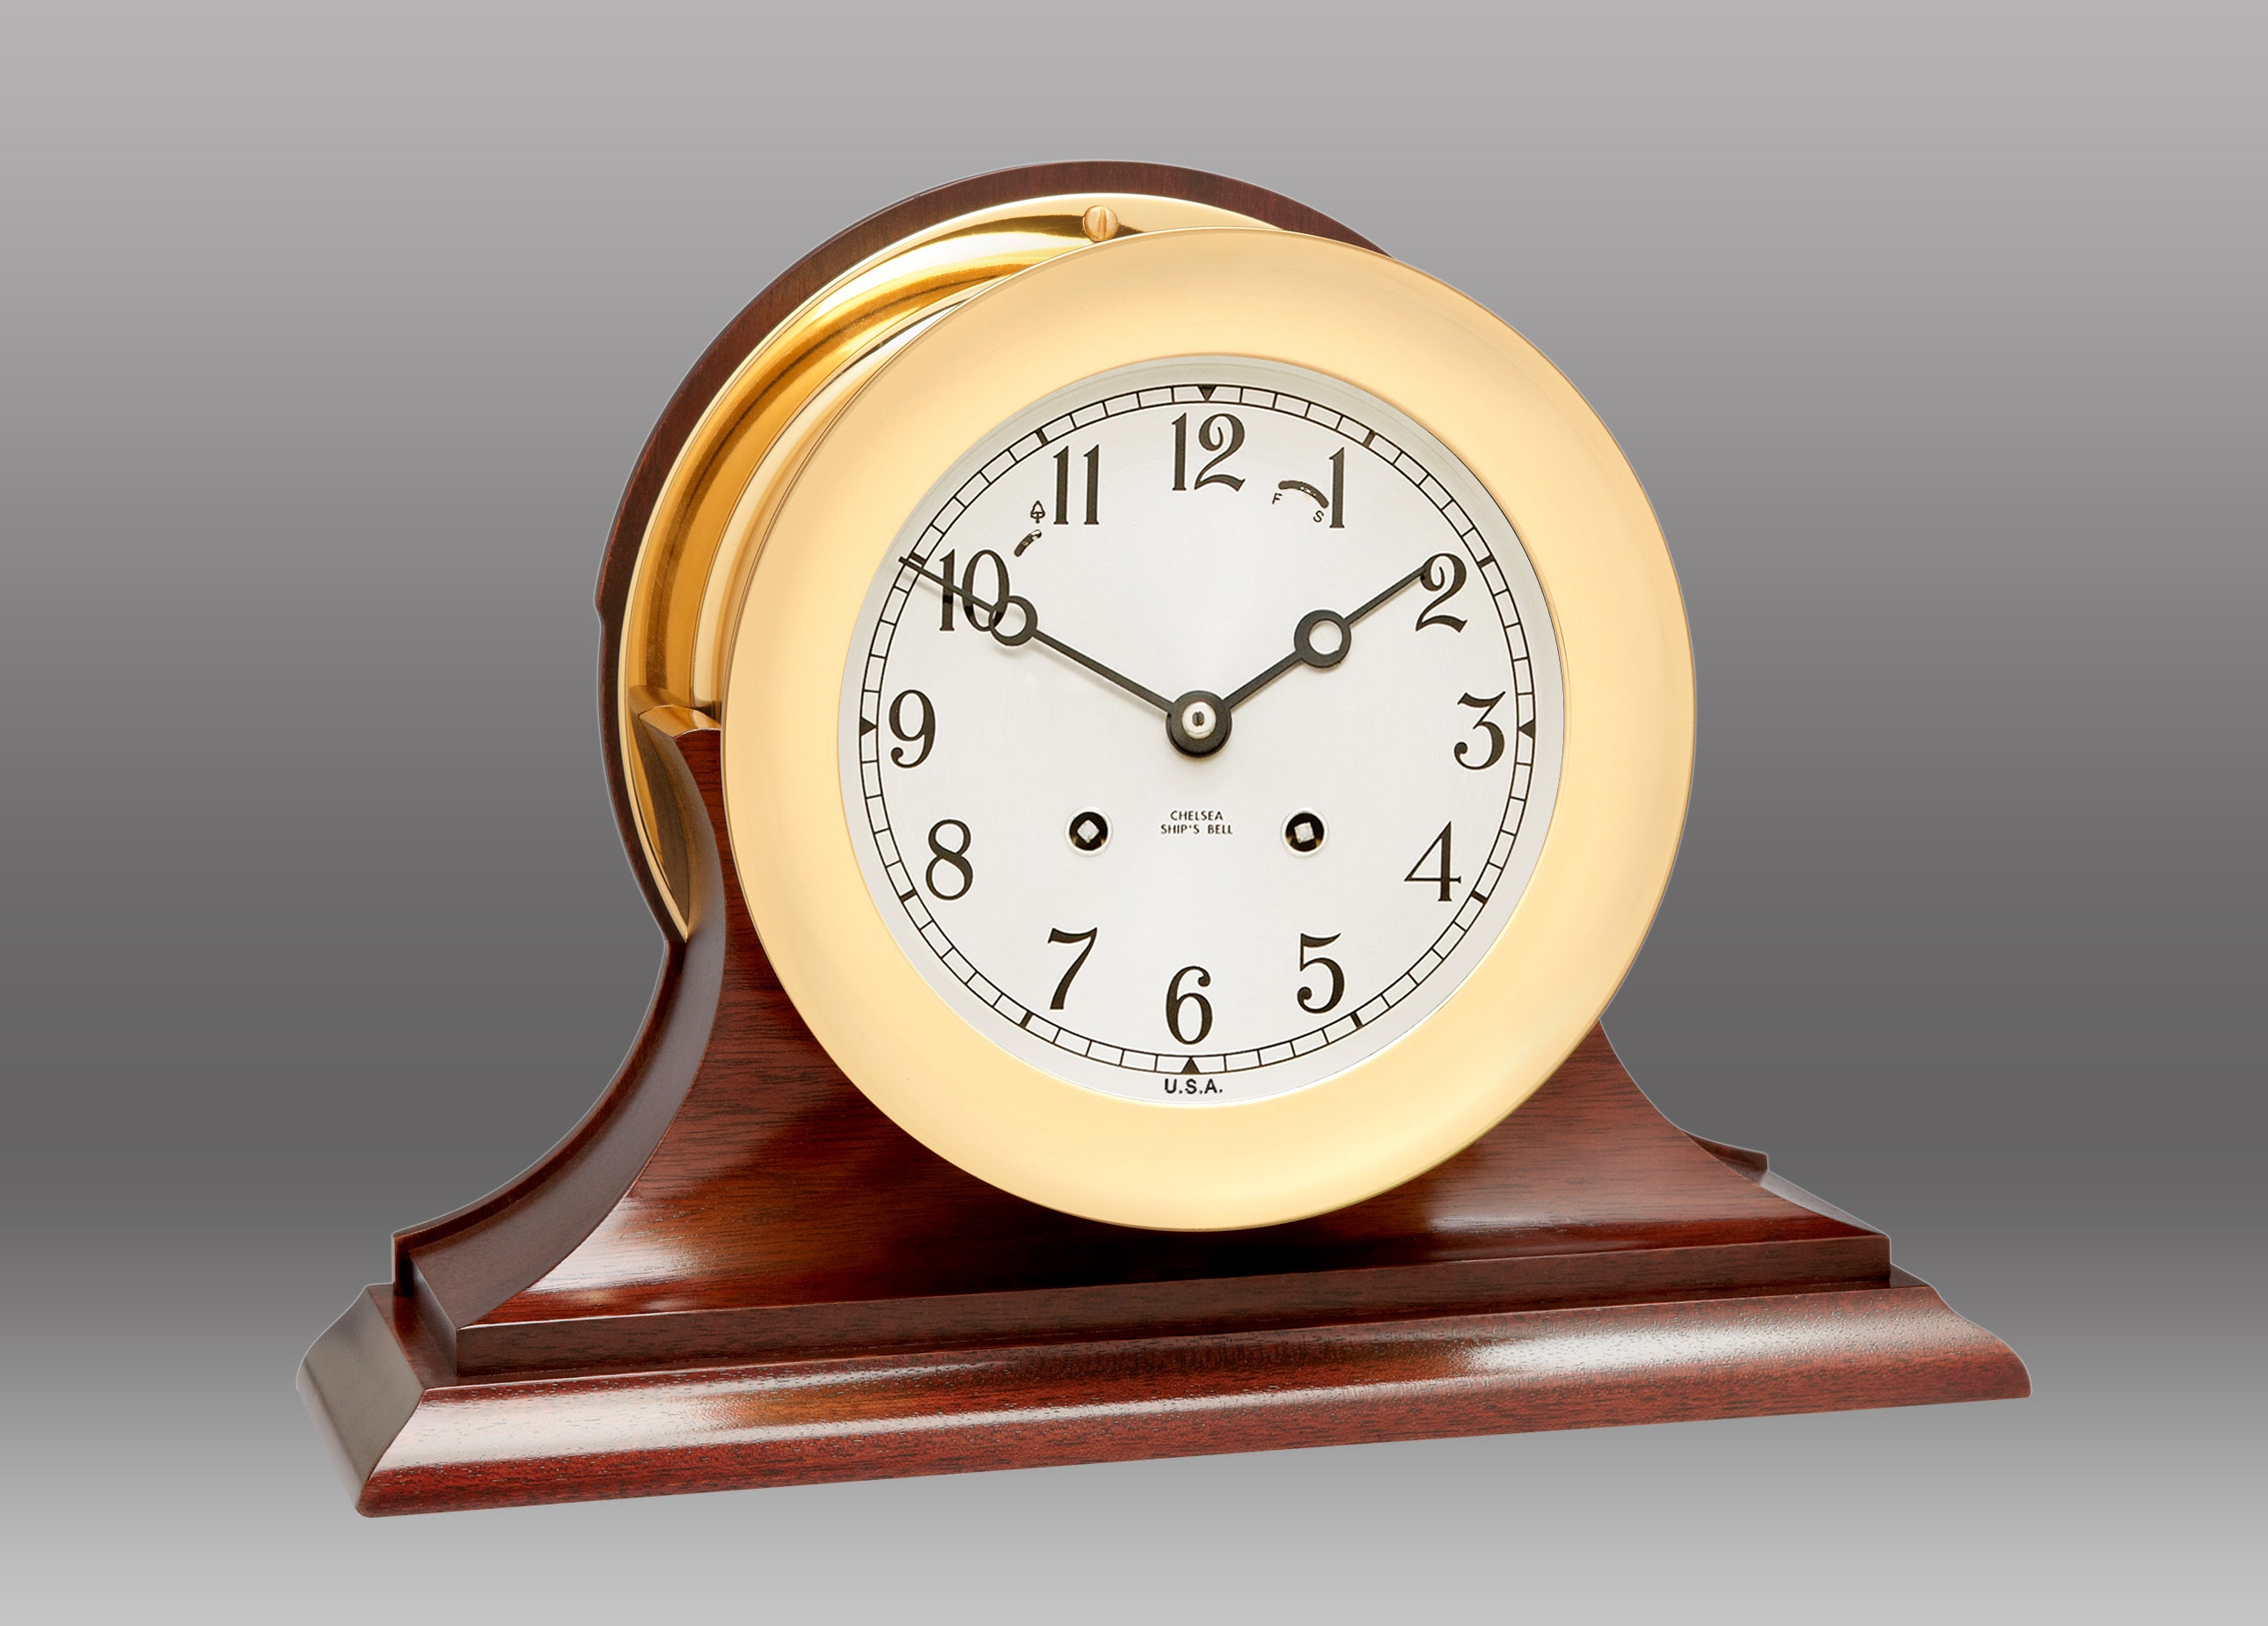  Wall Barometer, Wall Plaaque Design Traditional